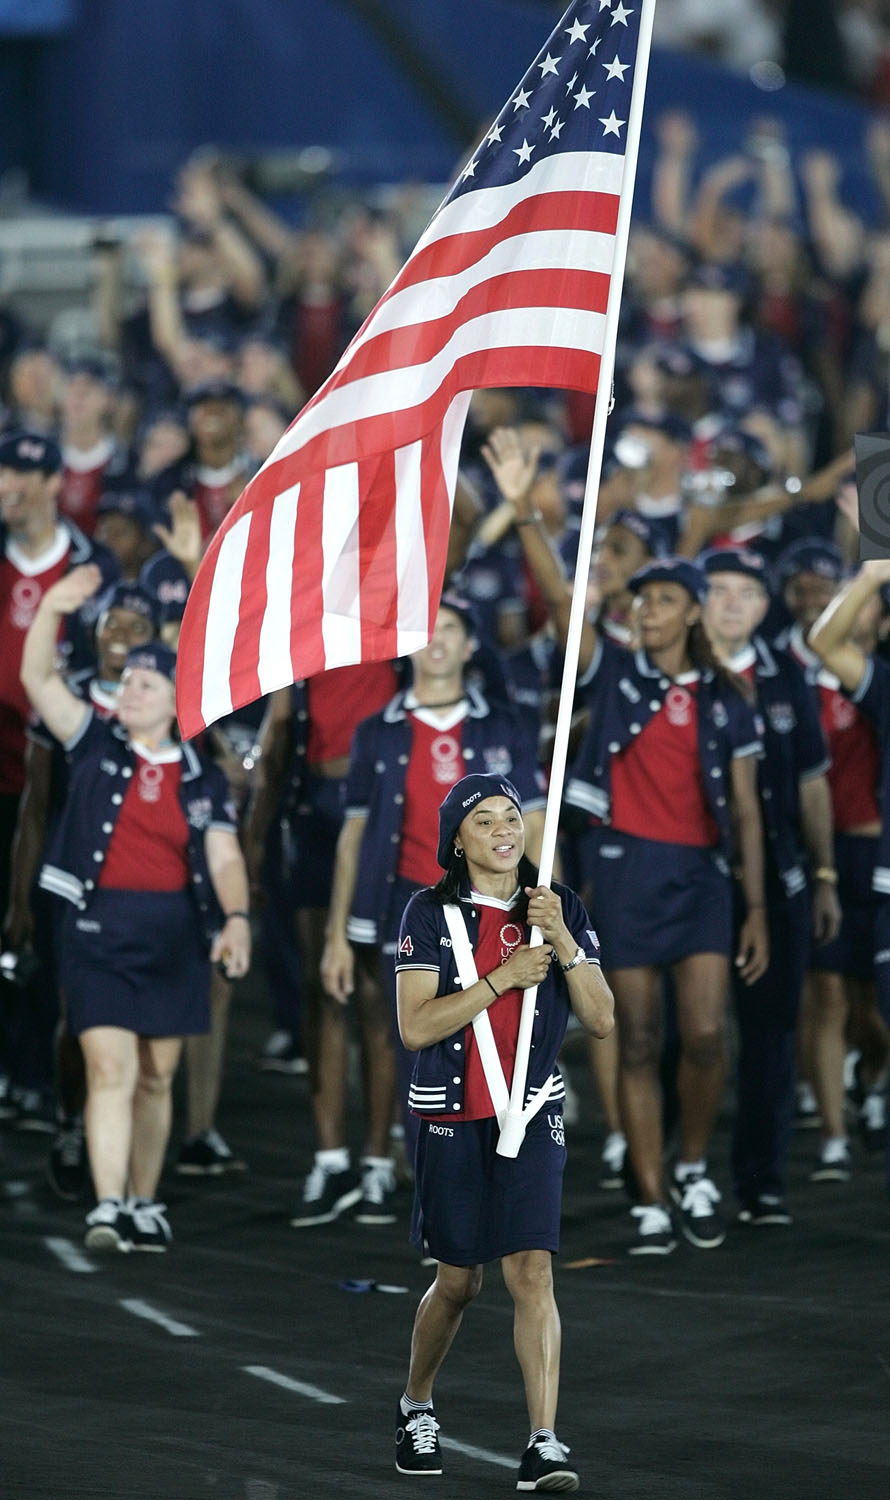 Basketball athlete Dawn Staley carries the U.S. national flag during the opening ceremony of the Athens 2004 Olympic Games.